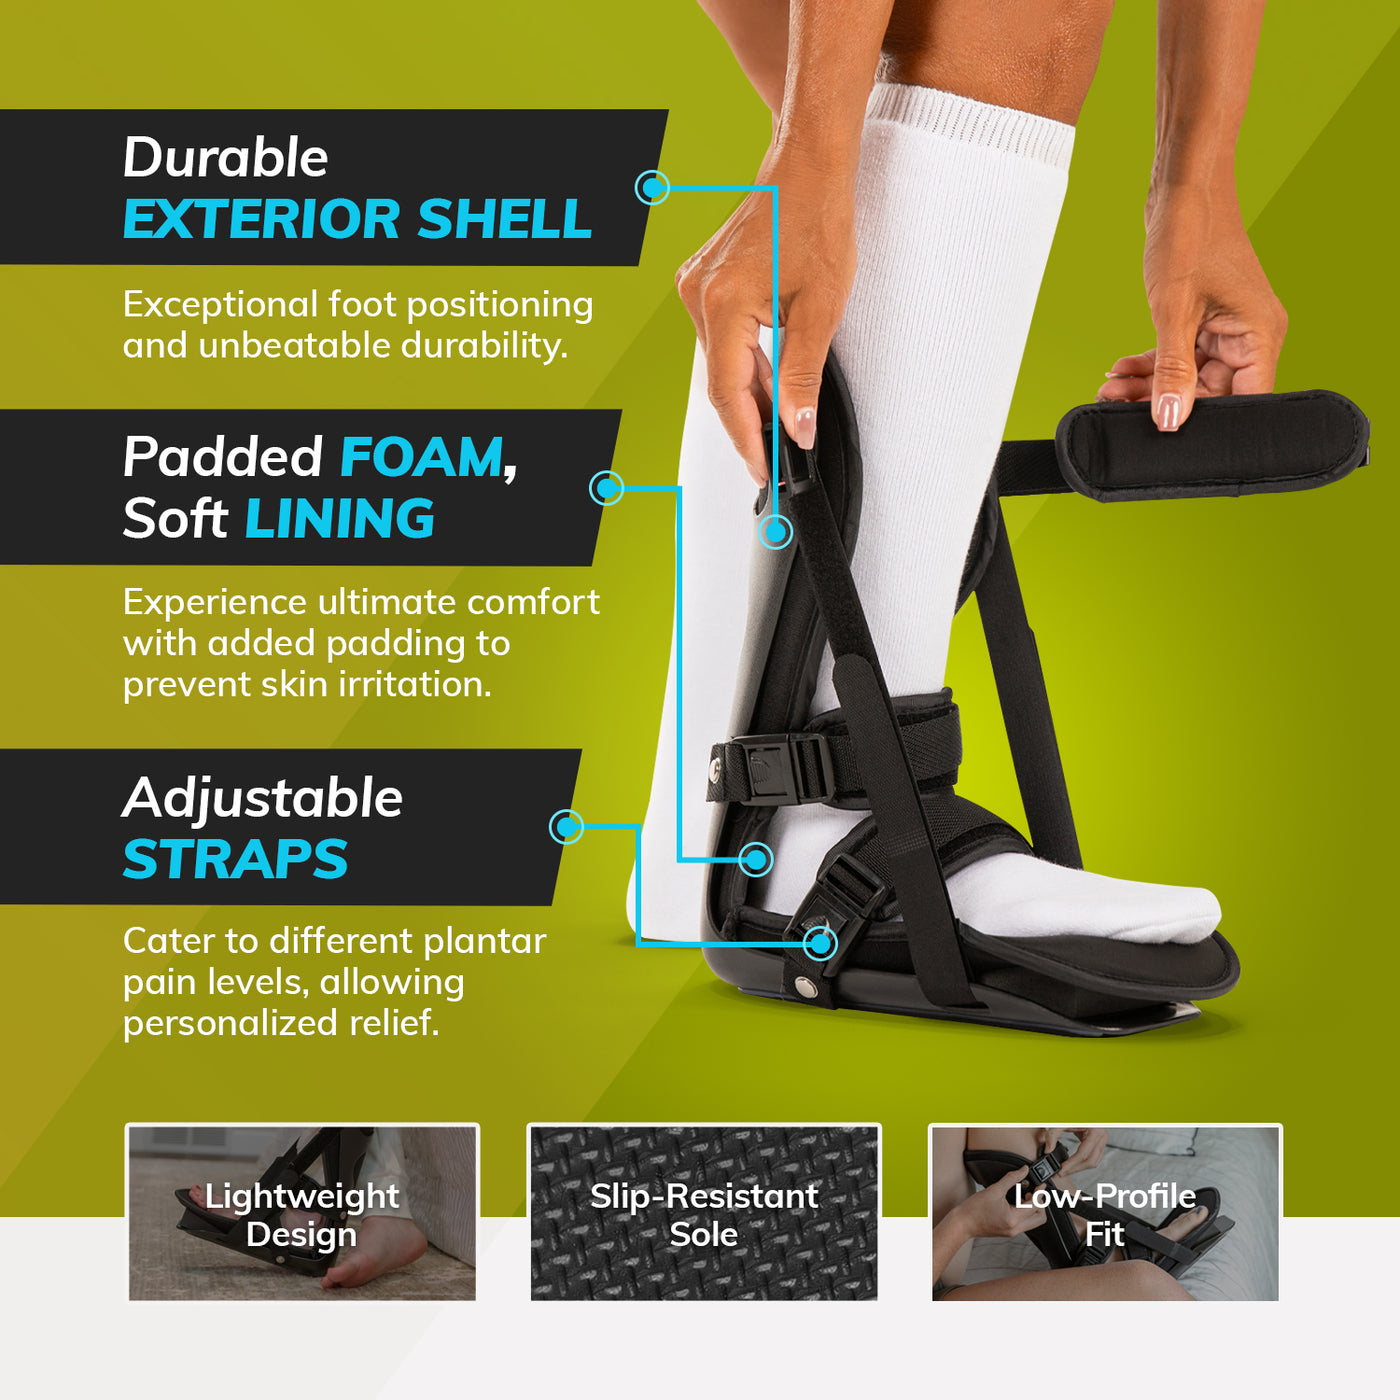 achilles tendon stretcher has a soft padded lining for comfort while sleeping